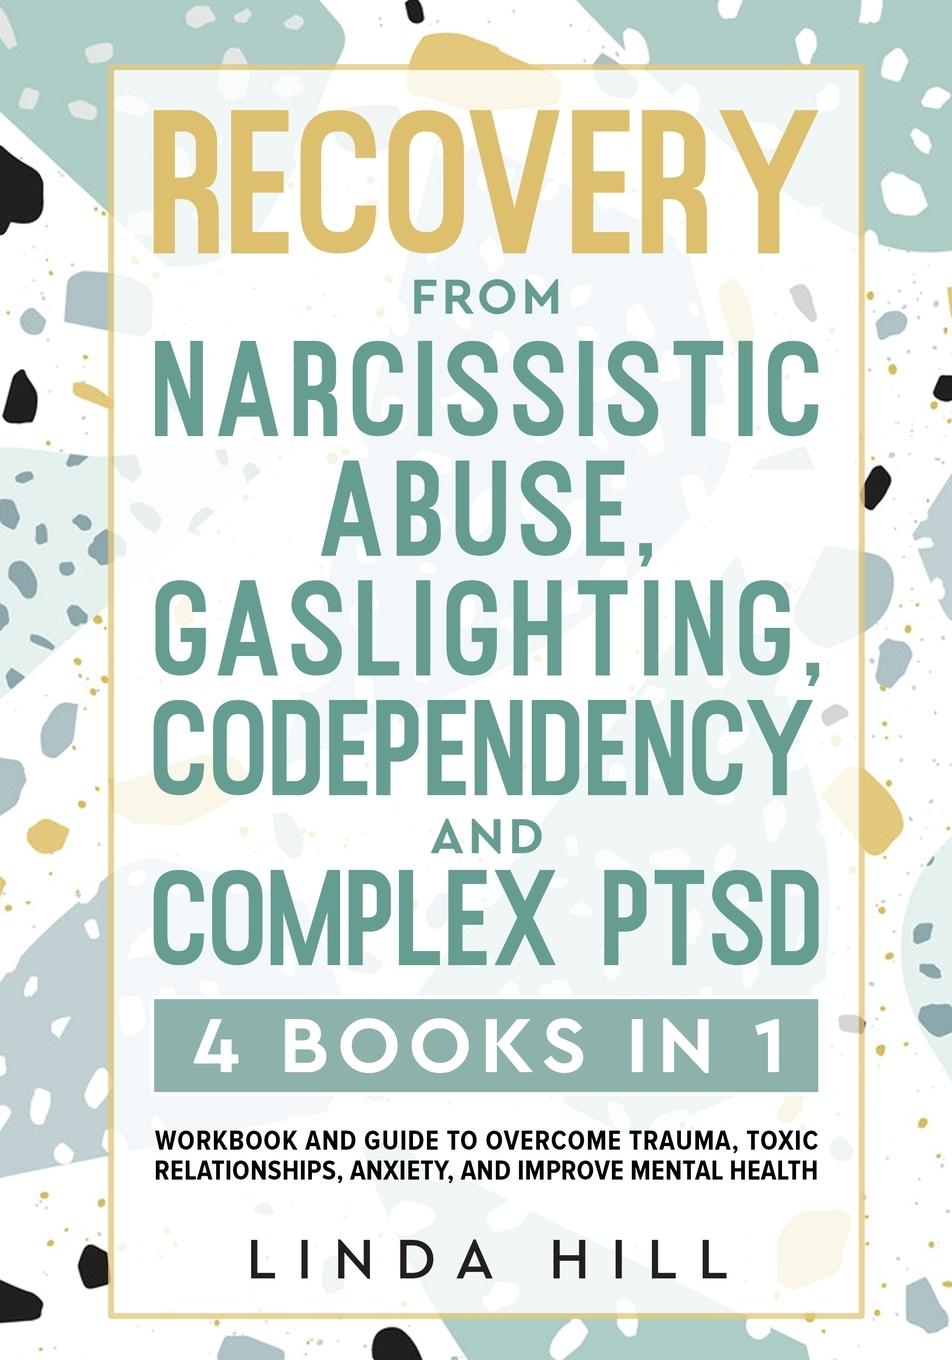 Book Recovery from Narcissistic Abuse, Gaslighting, Codependency and Complex PTSD (4 Books in 1) 